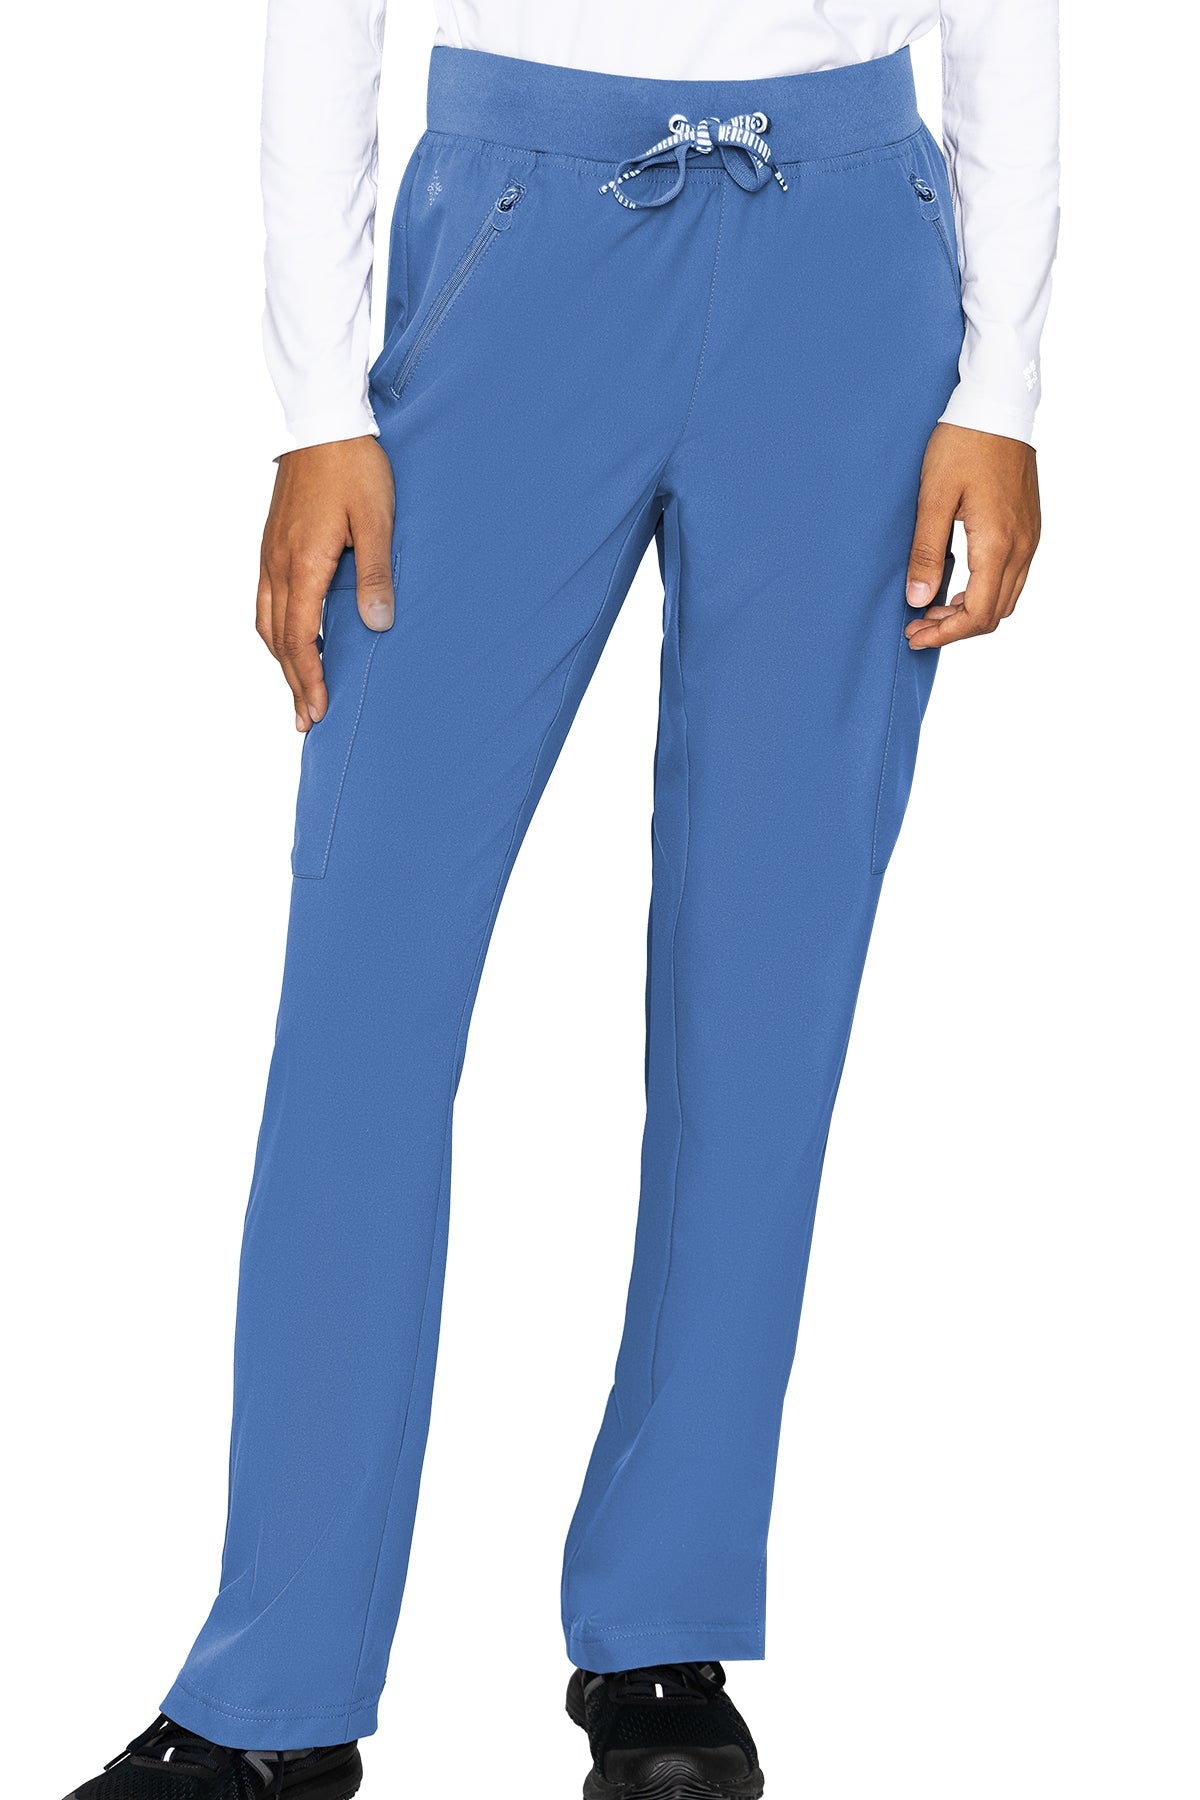 MED COUTURE Insight Zipper Pant